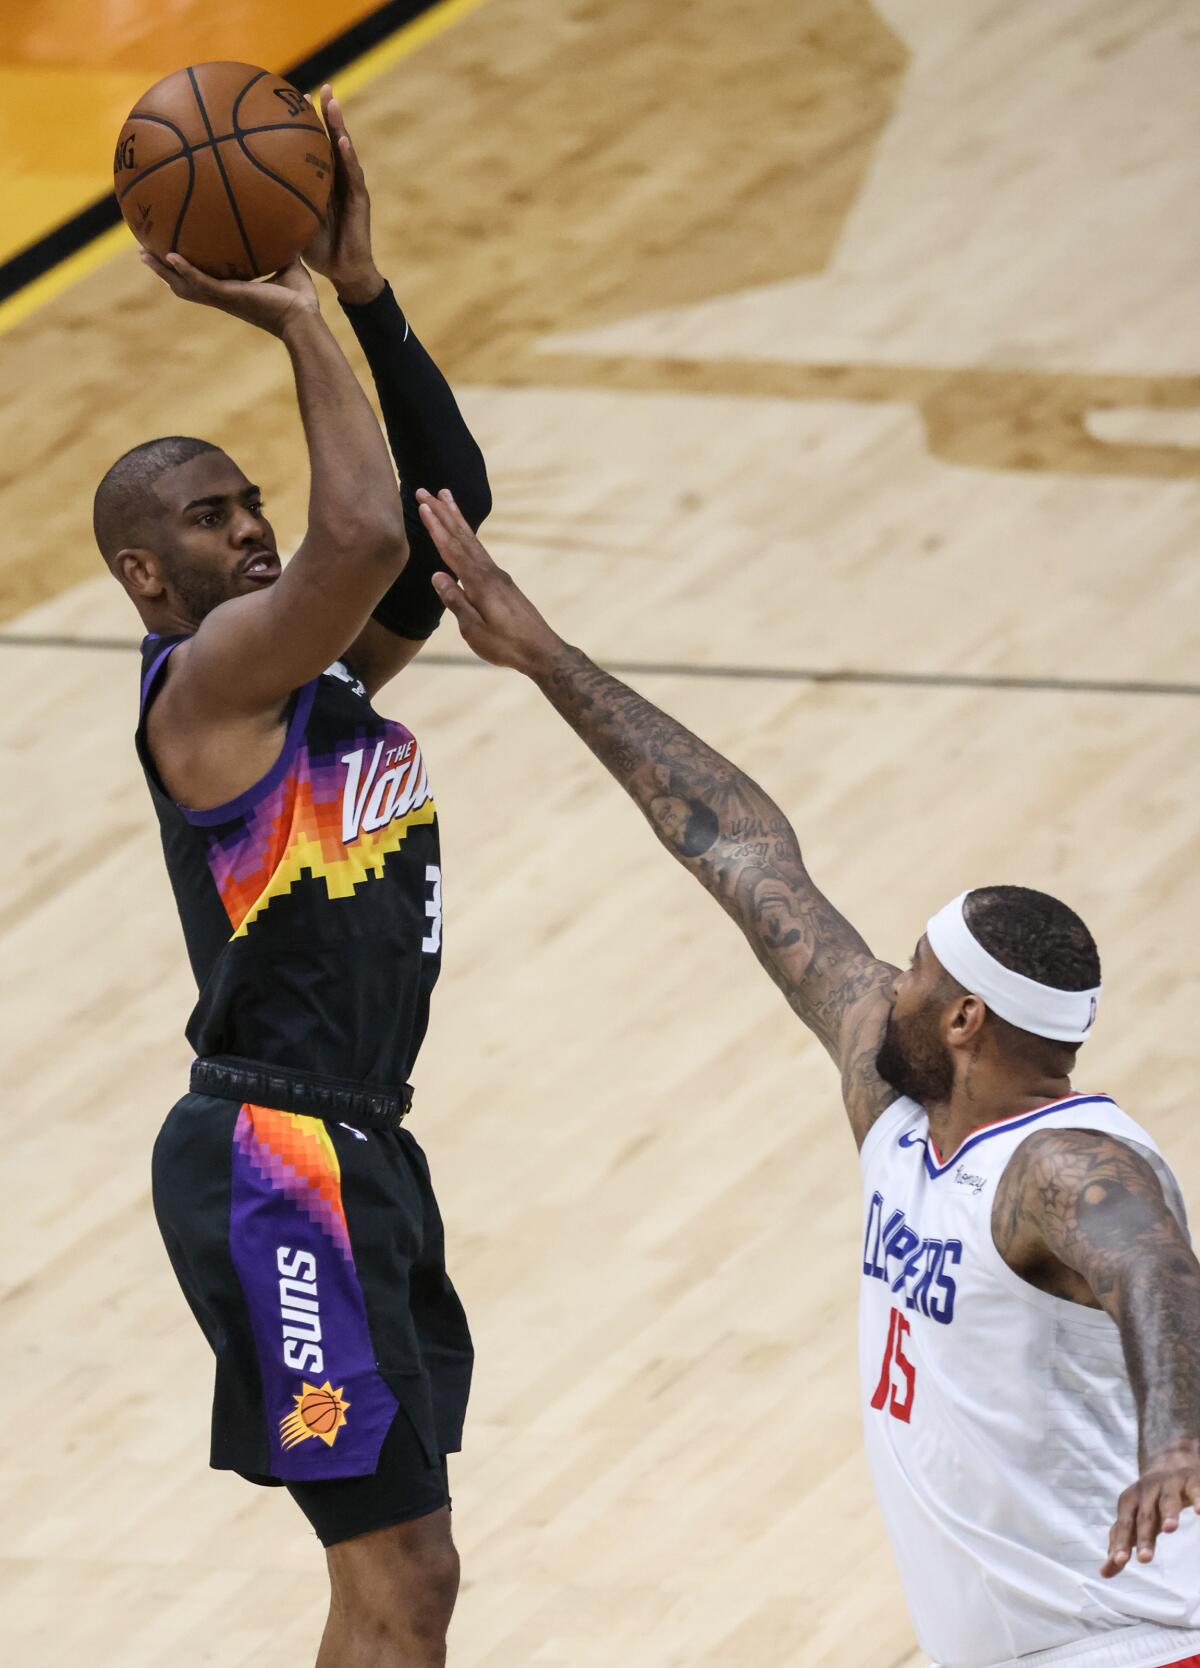 Suns guard Chris Paul shoots over Clippers center DeMarcus Cousins during Game 5.